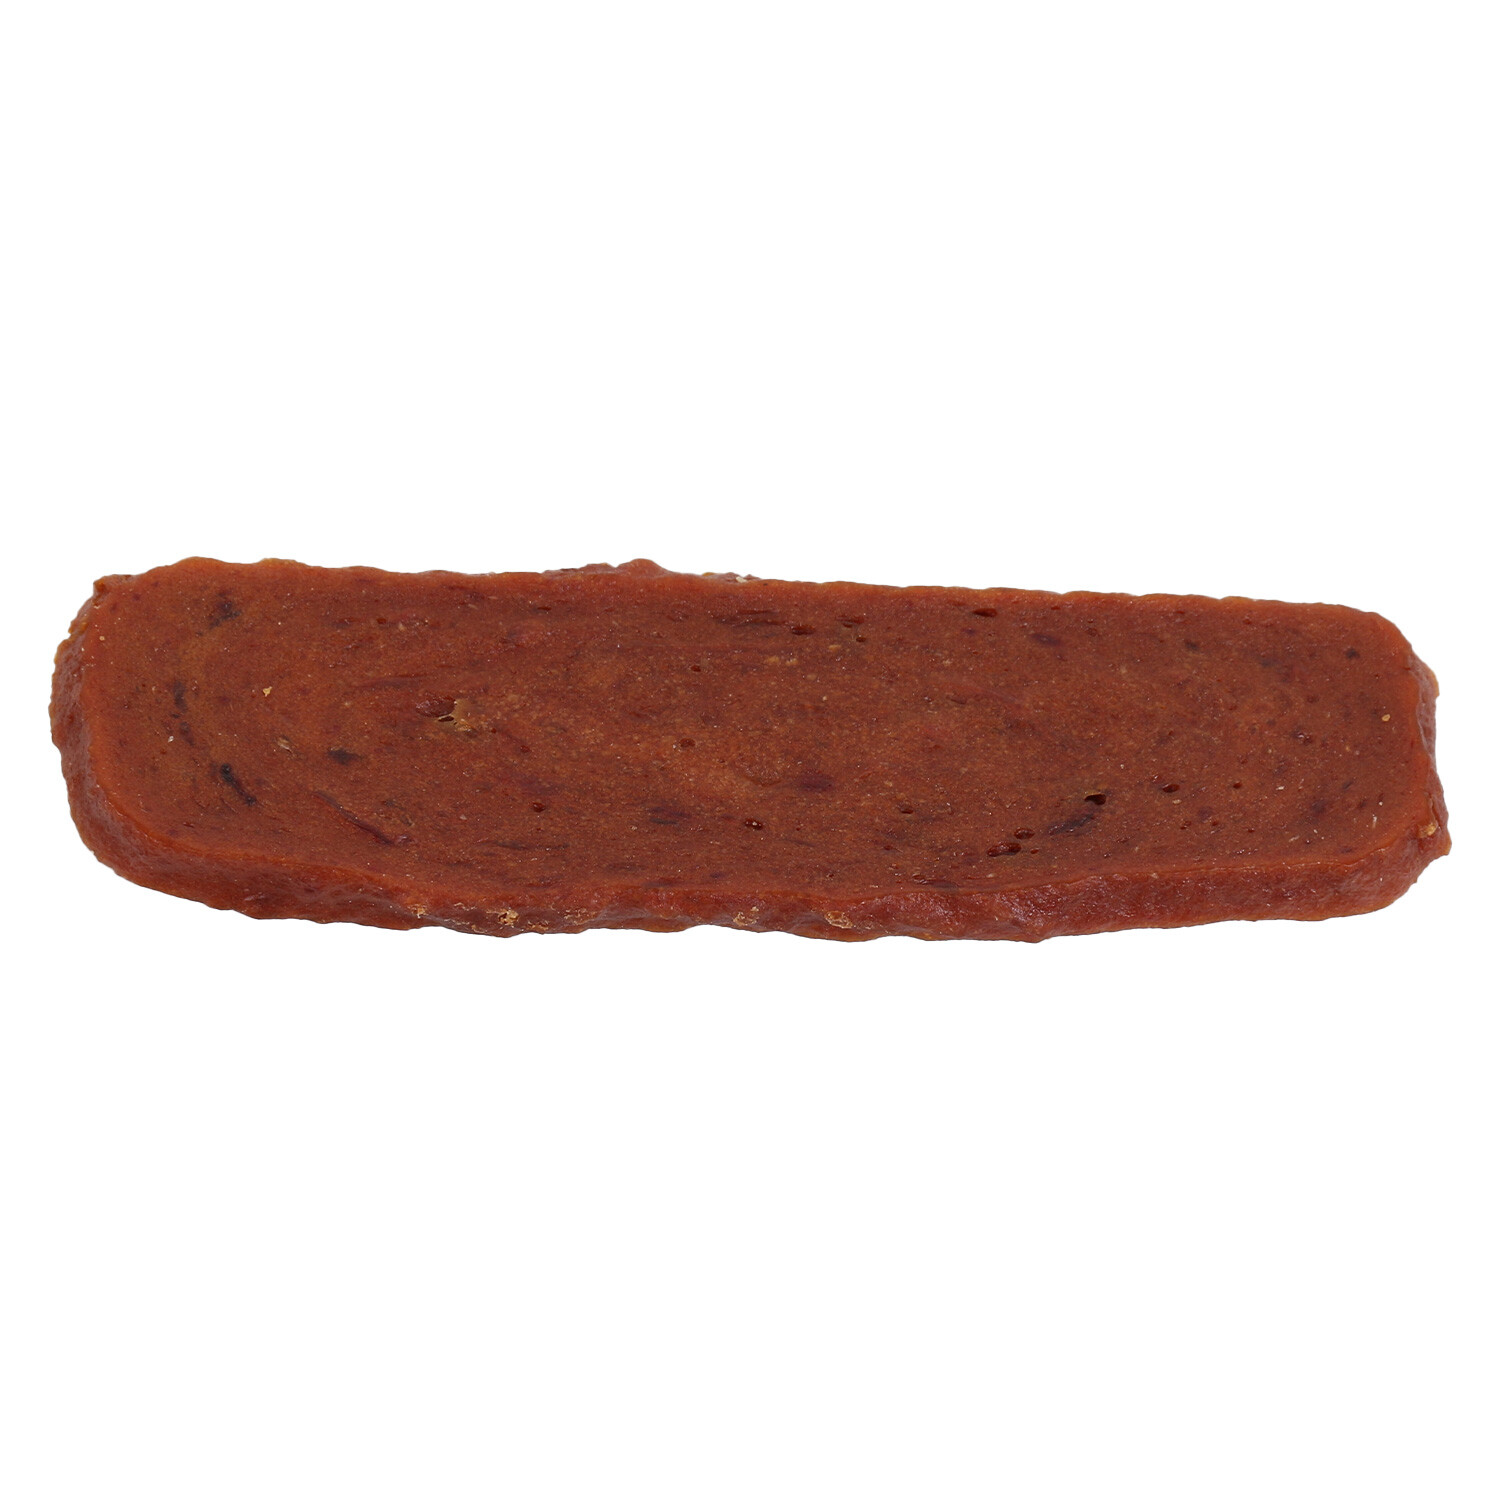 Clever Paws Venison Steaks Dog Treat 80g Image 2